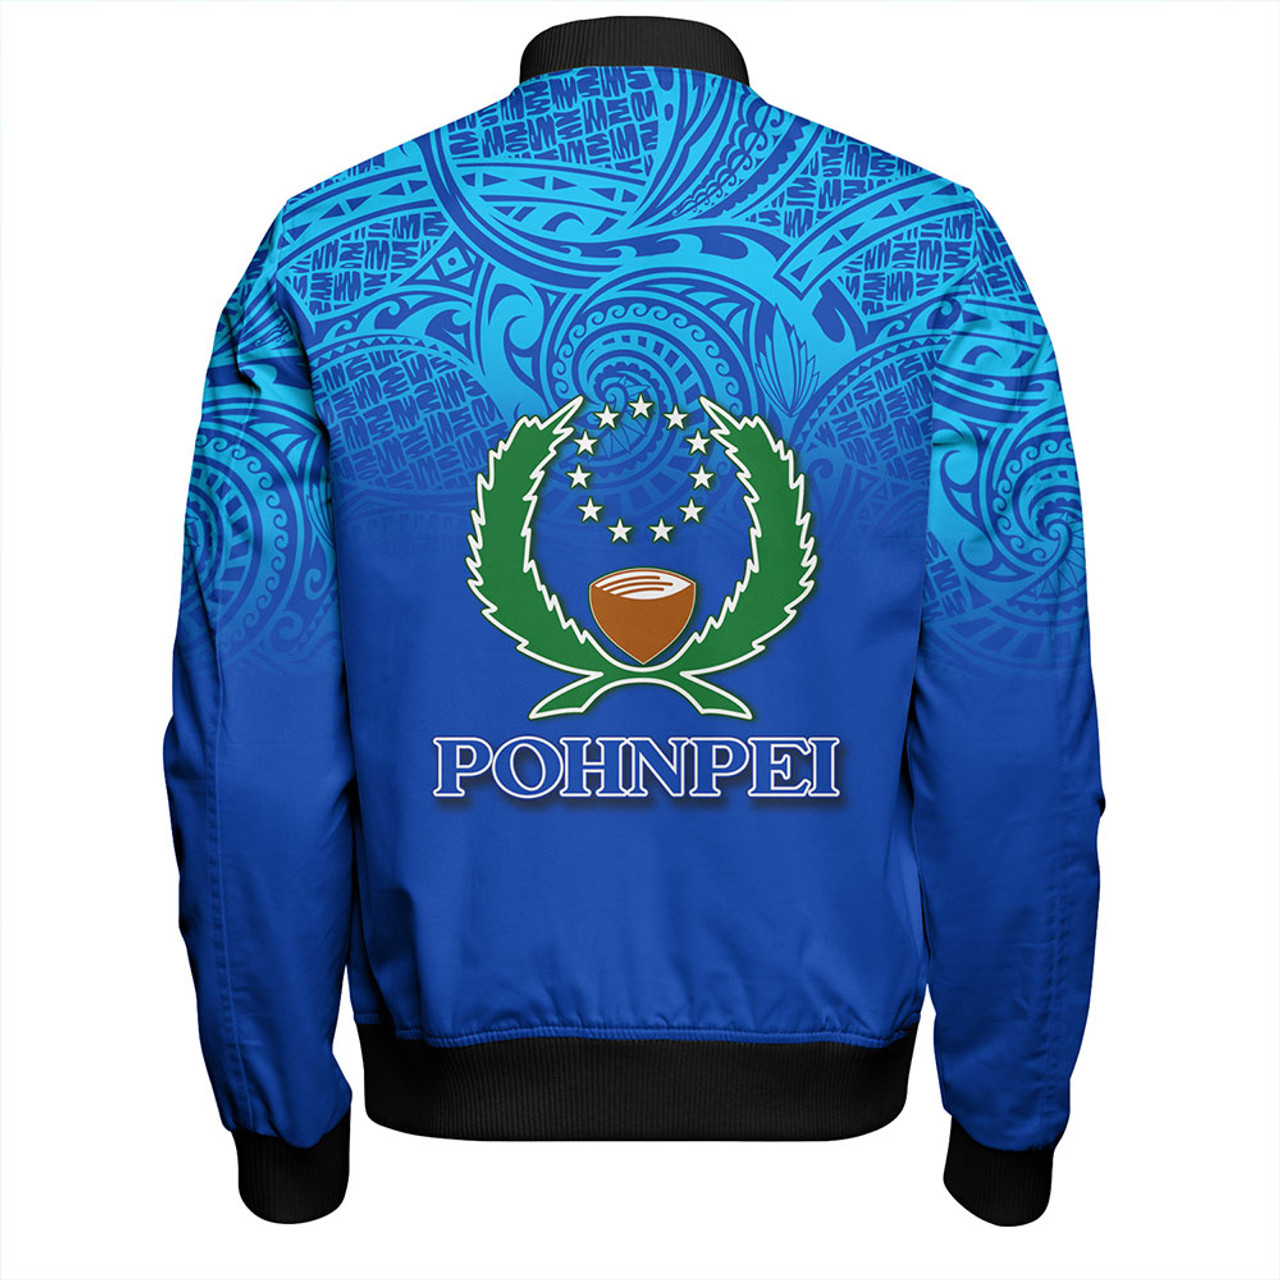 Pohnpei State Bomber Jacket Flag Color With Traditional Patterns